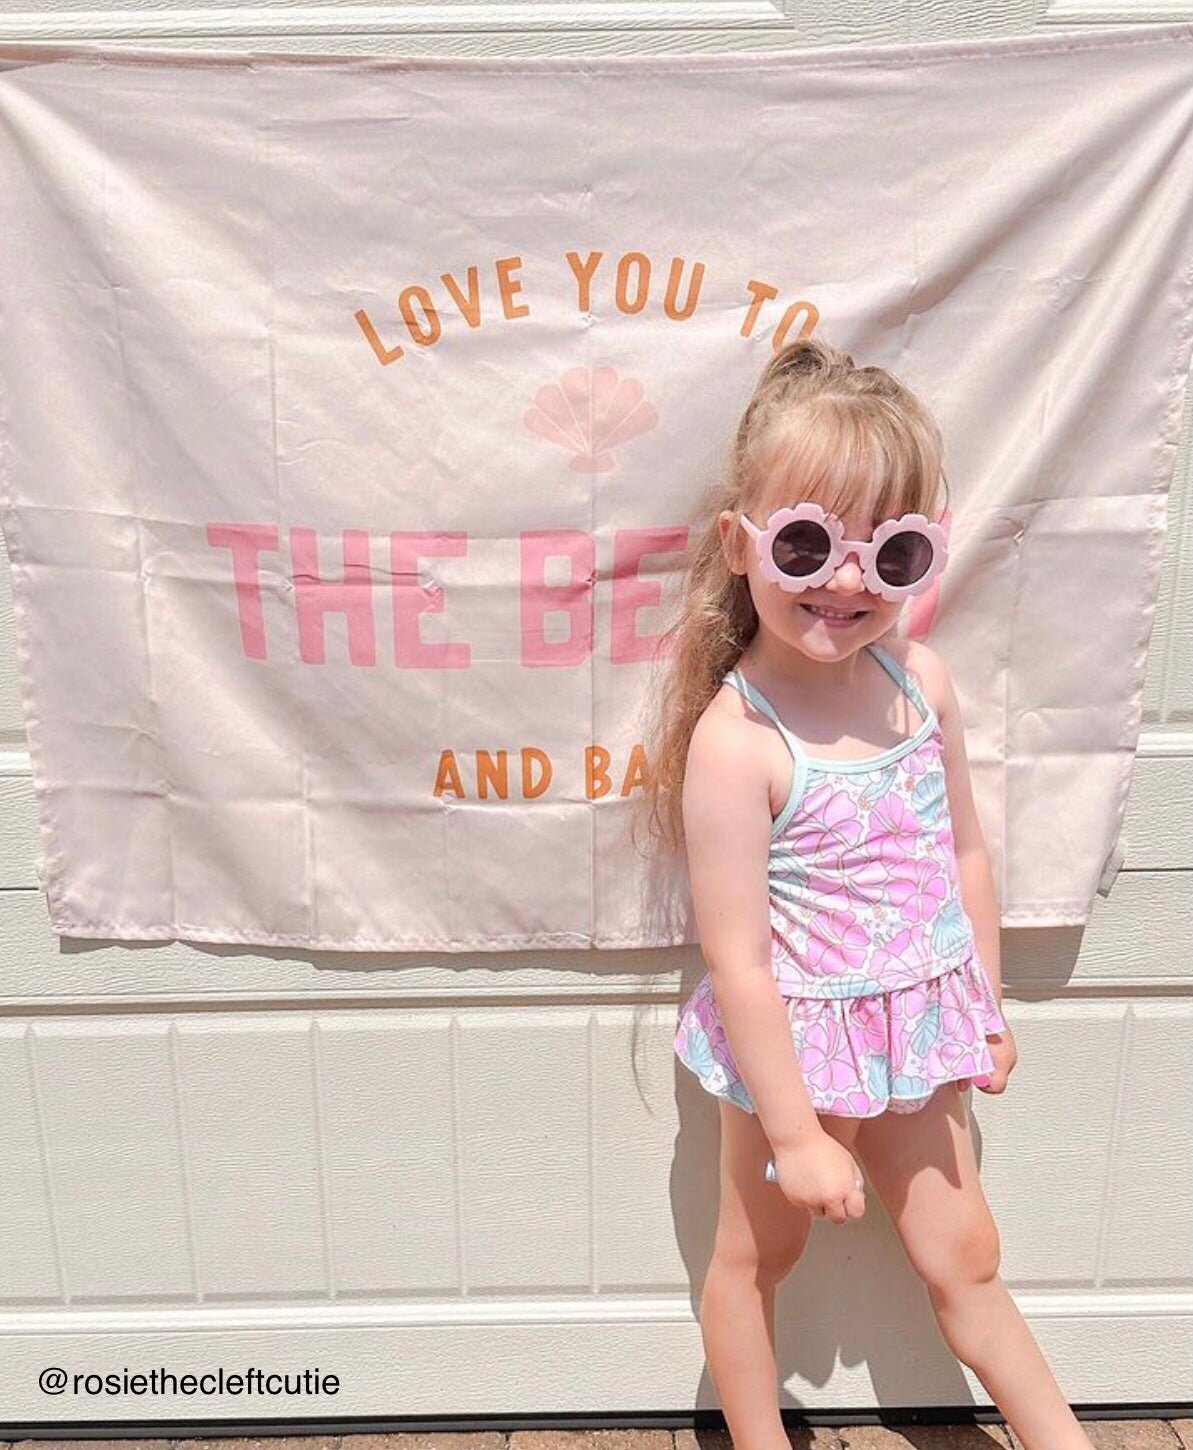 {Palm Pink + Gold} Love You to the Beach And Back Banner